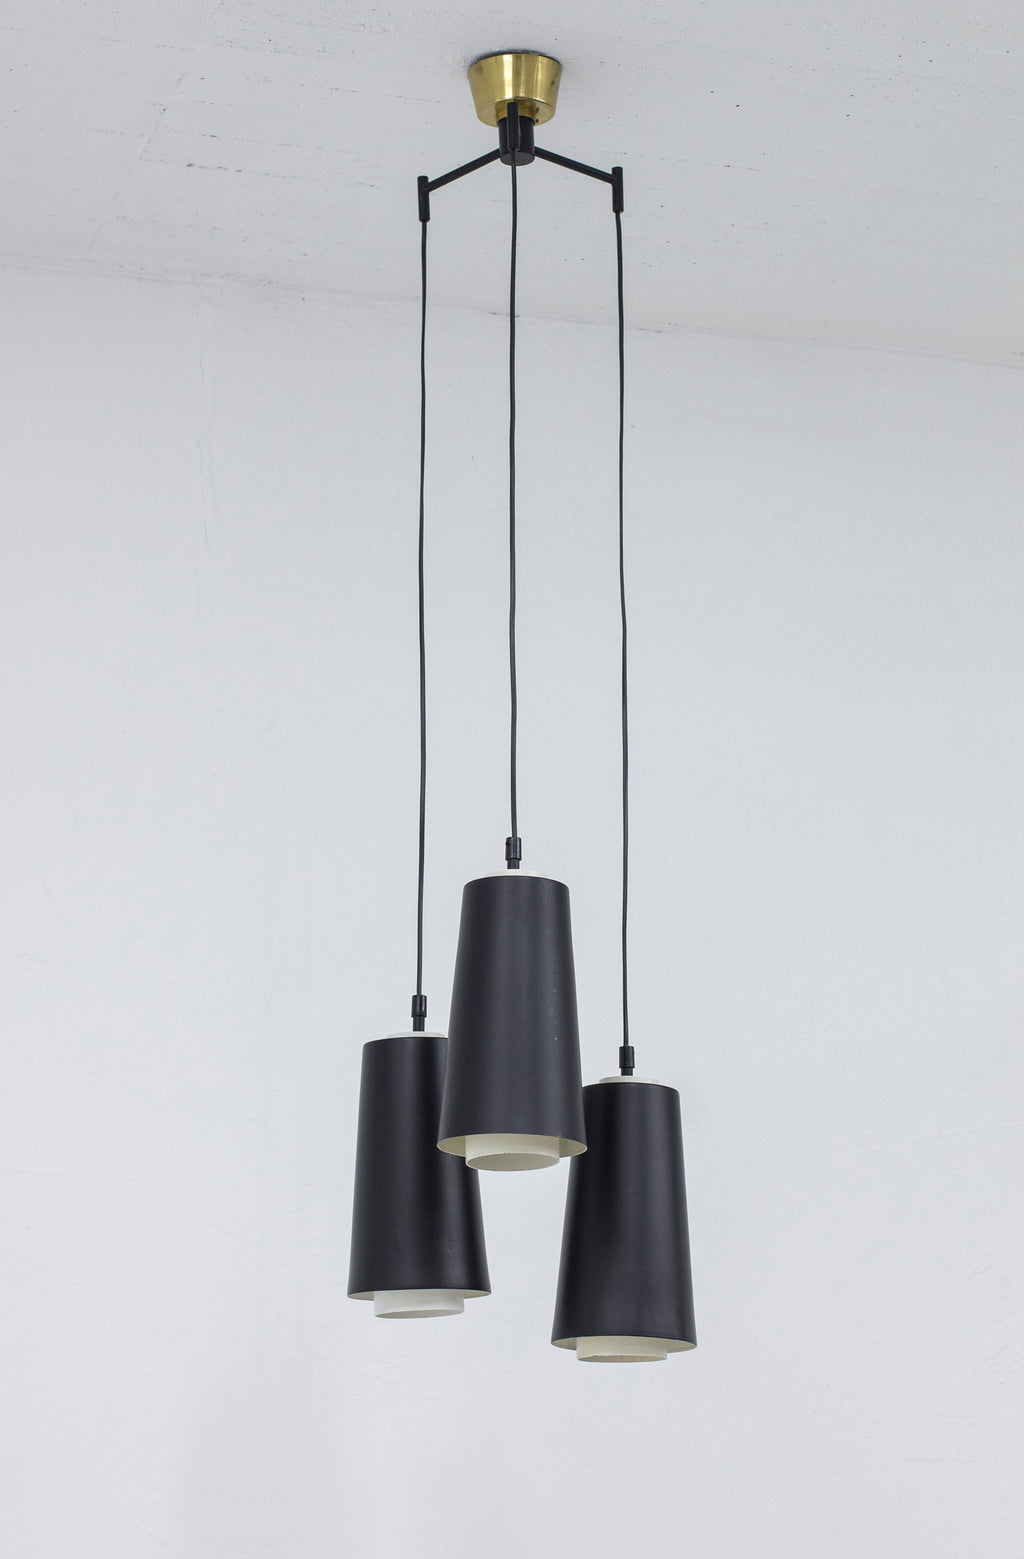 Trippel pendant by Luco